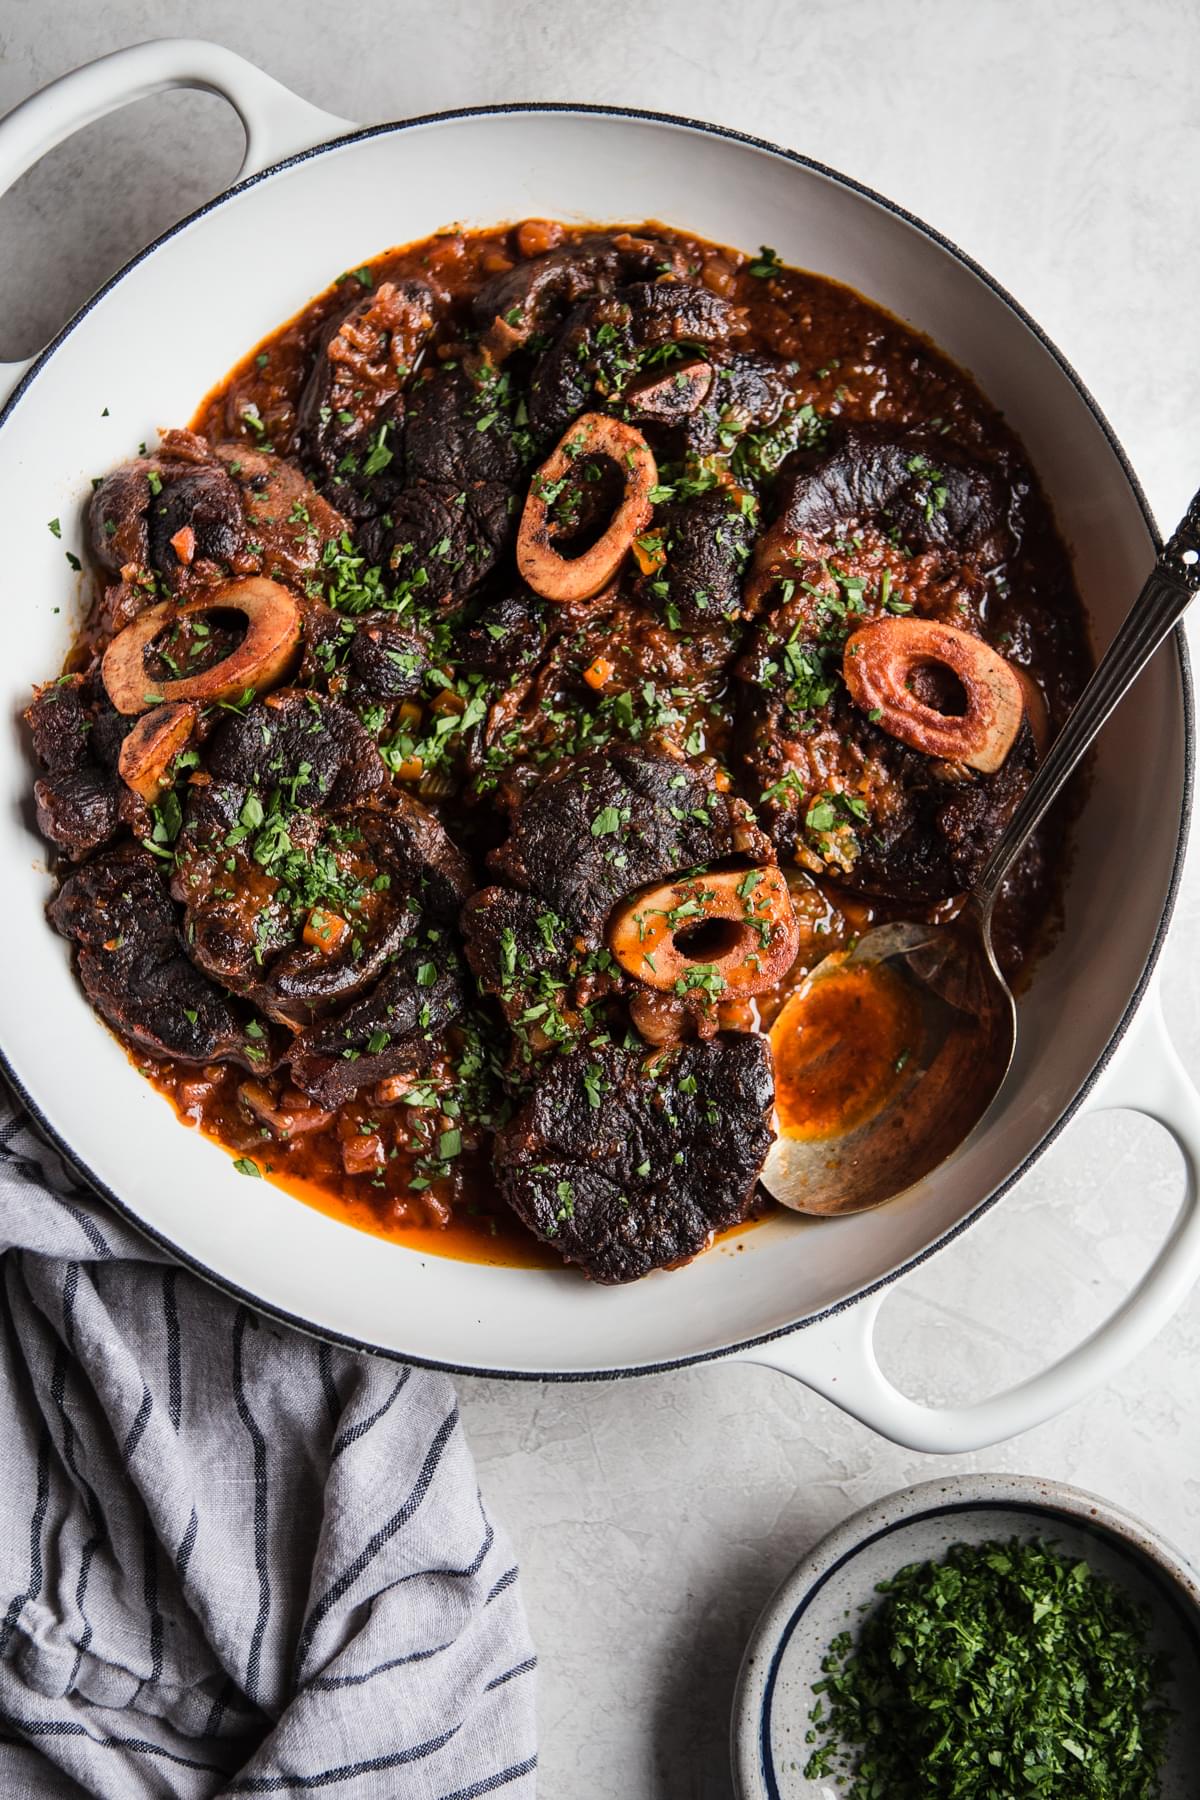 Italian osso buco cross cut beef shanks in a braiser with sauce